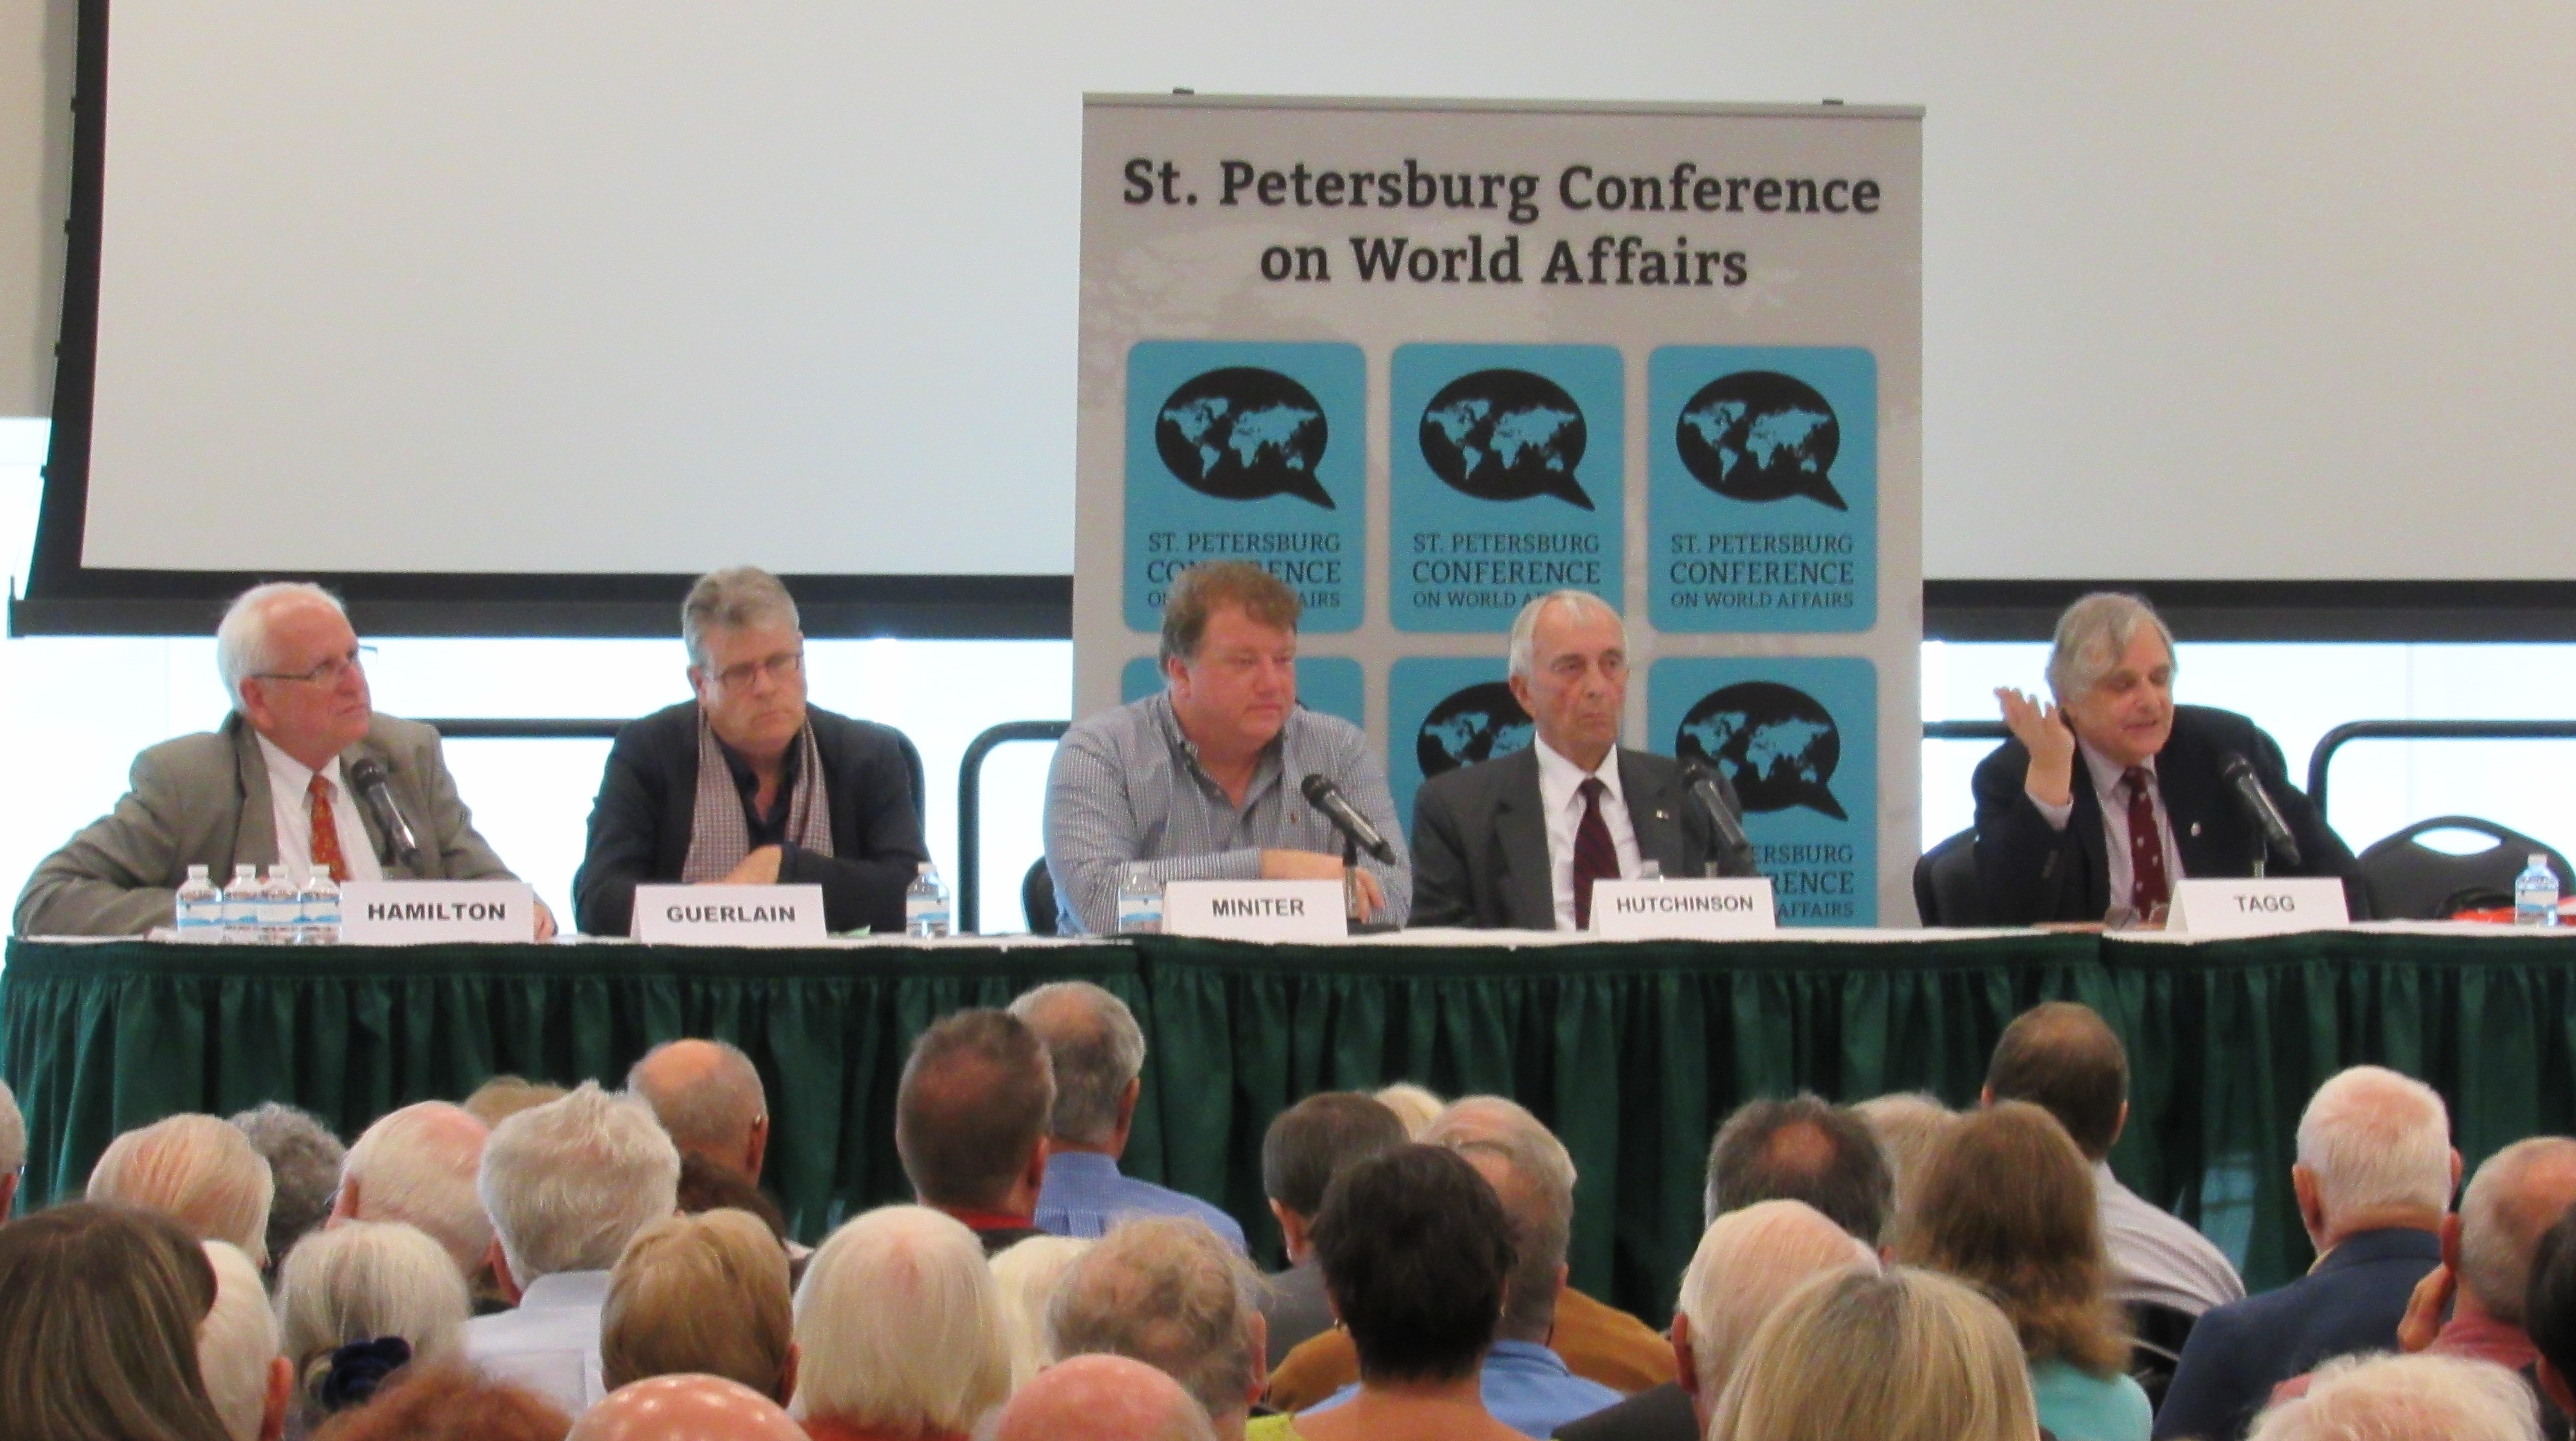 World Affairs: The St. Petersburg Conference on World Affairs was co-founded in 2013 by Dr. Thomas Smith and Ambassador Douglas L. McElhaney. Last year the conference brought in around 2,000 people over three days. ABIGAIL PAYNE | THE CROW'S NEST